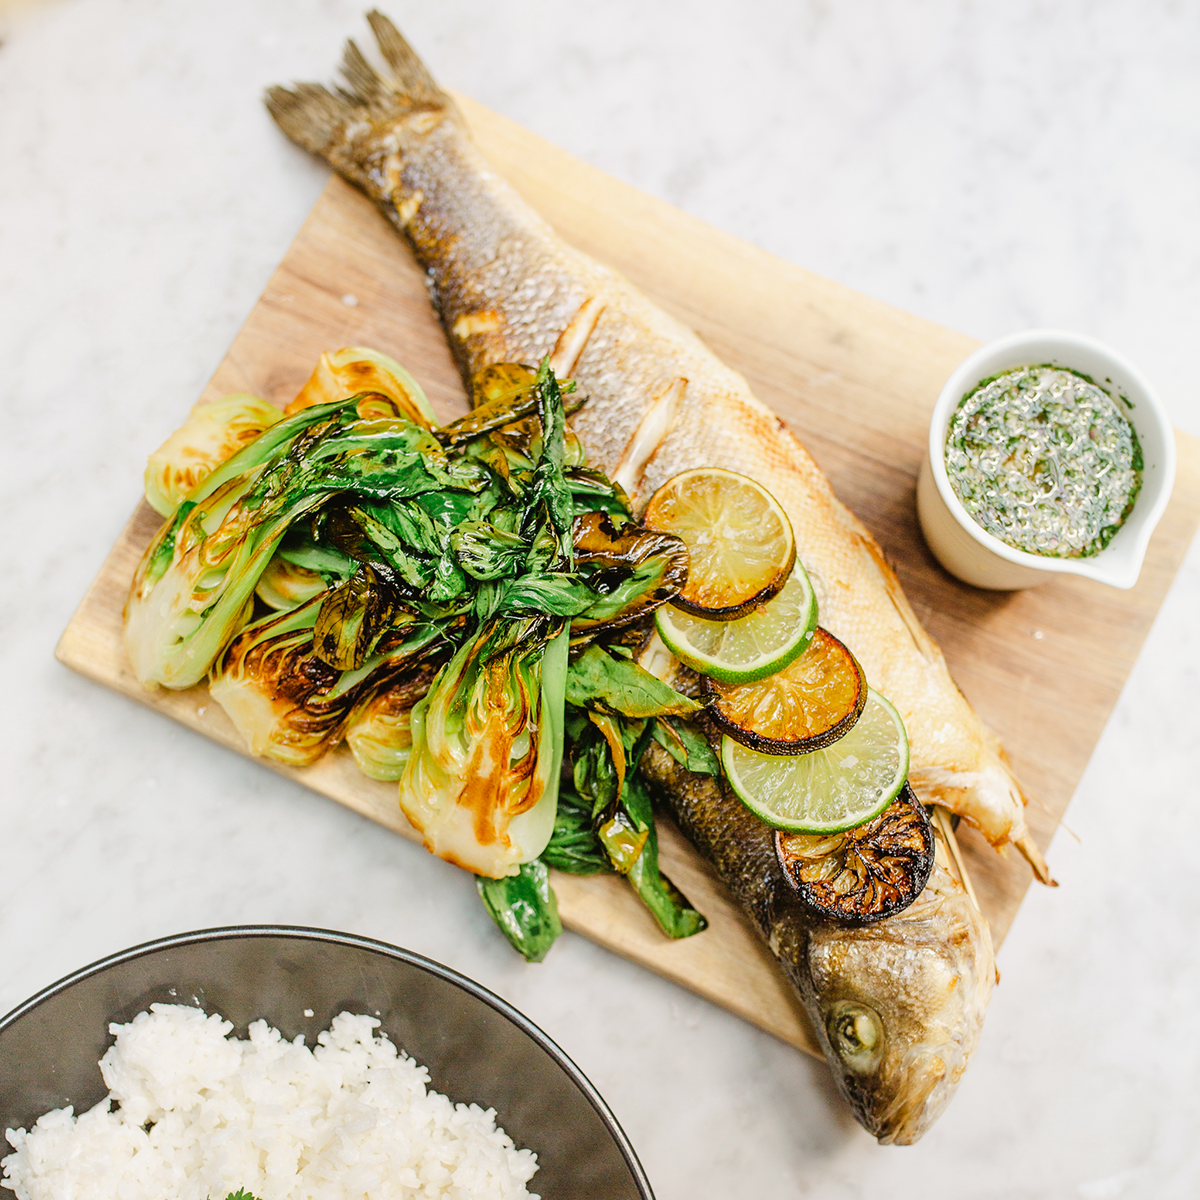 Whole Baked Sea Bass with Lemongrass, Bok Choy, and Coconut Rice